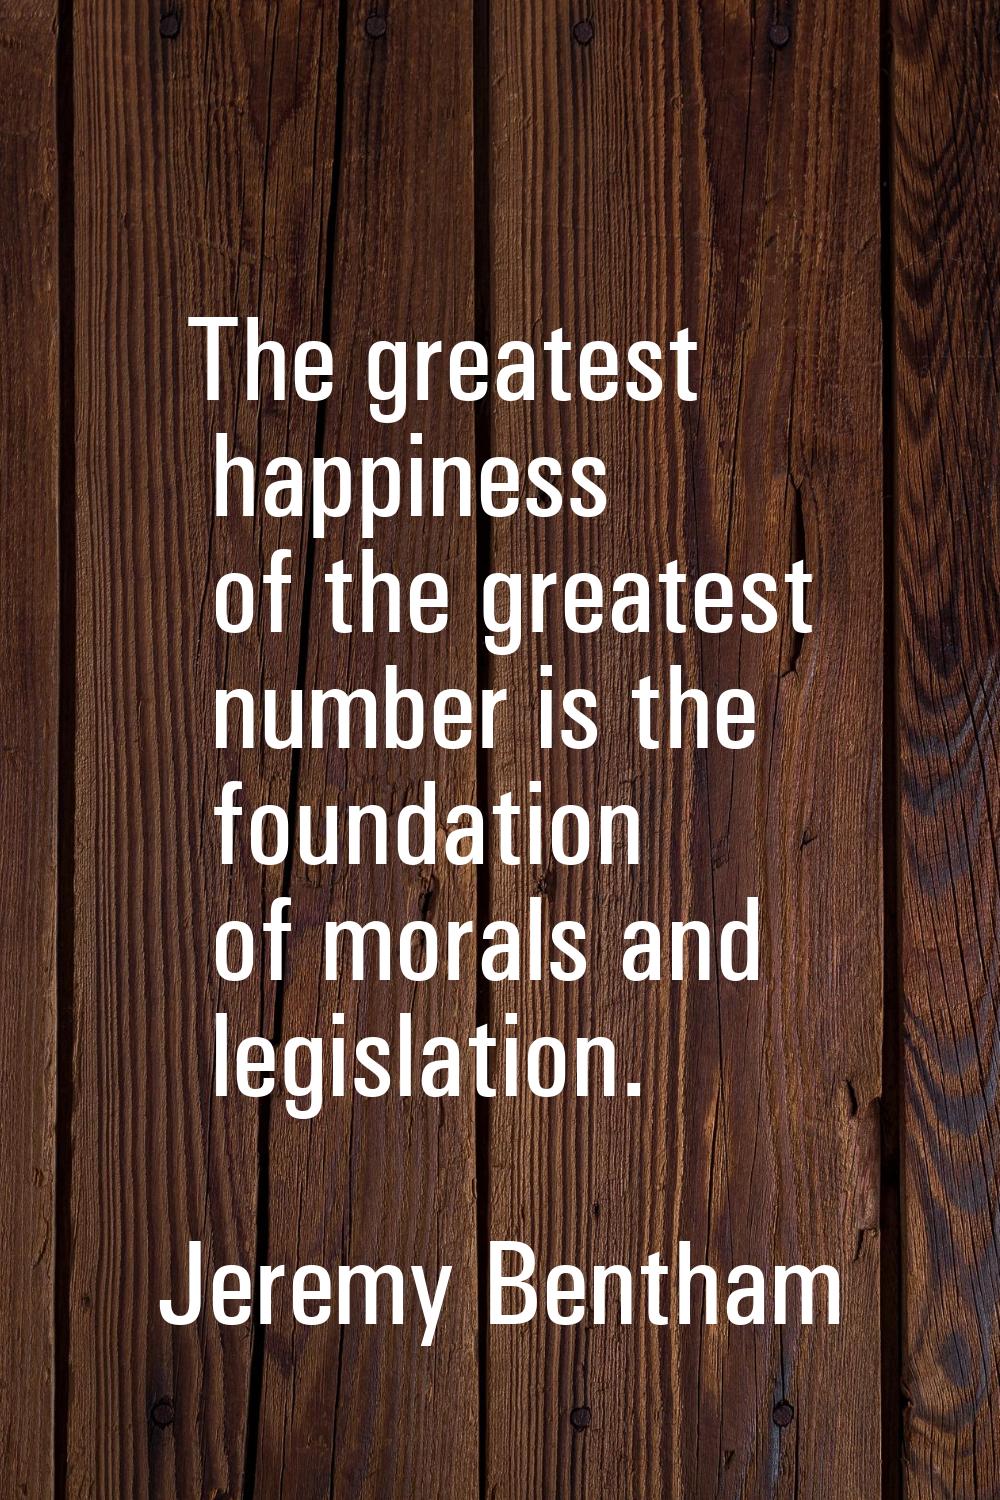 The greatest happiness of the greatest number is the foundation of morals and legislation.